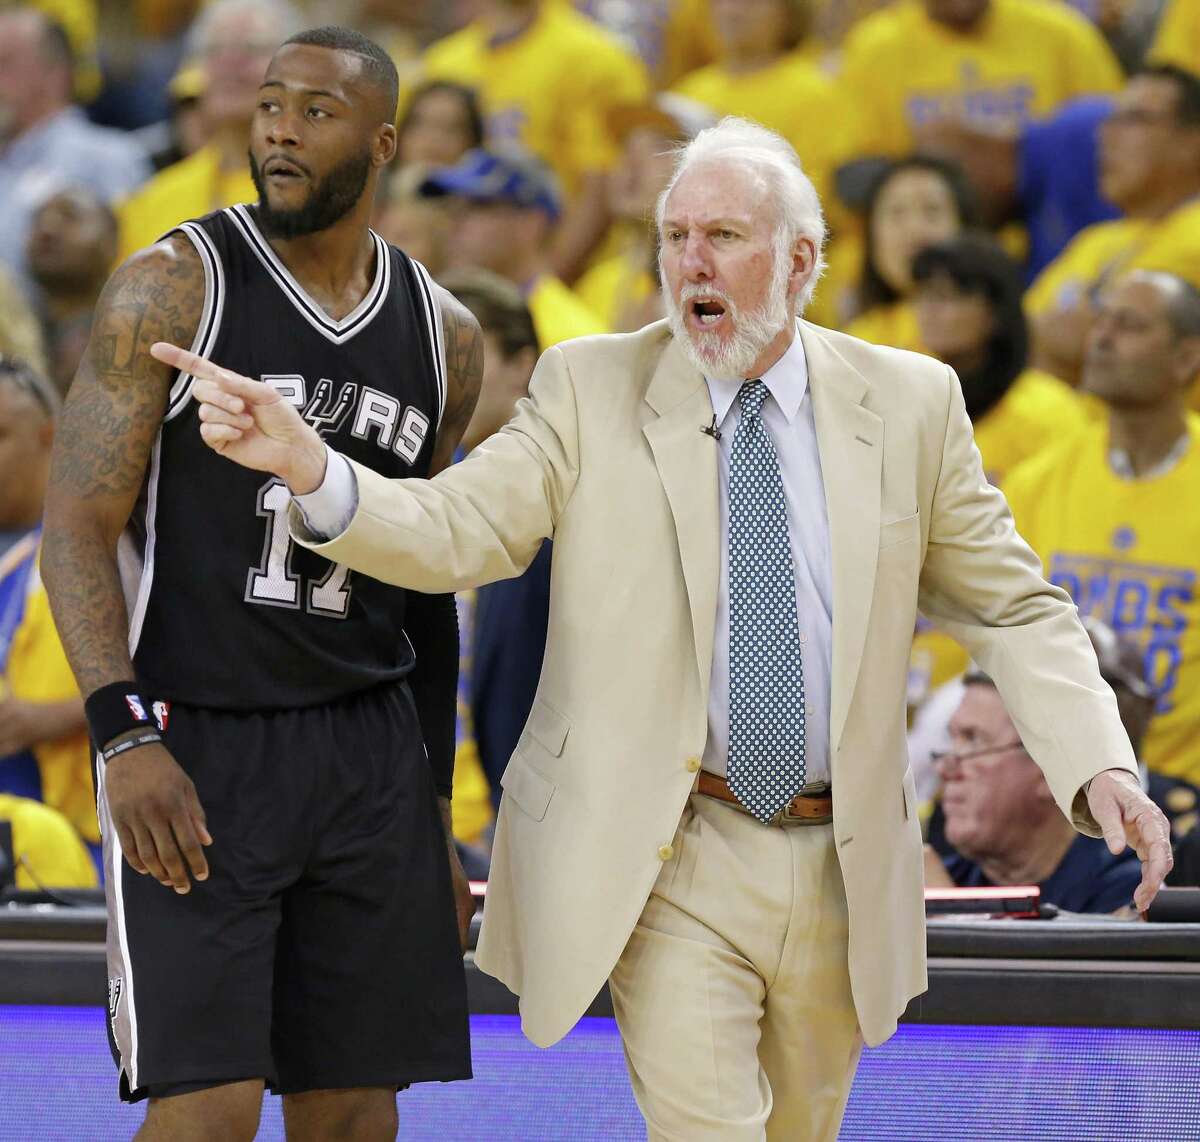 Spurs coach Gregg Popovich calls a play as Jonathon Simmons looks on during second half action of Game 1 in the Western Conference finals against the Golden State Warriors on May 14, 2017 at Oracle Arena in Oakland, Calif.